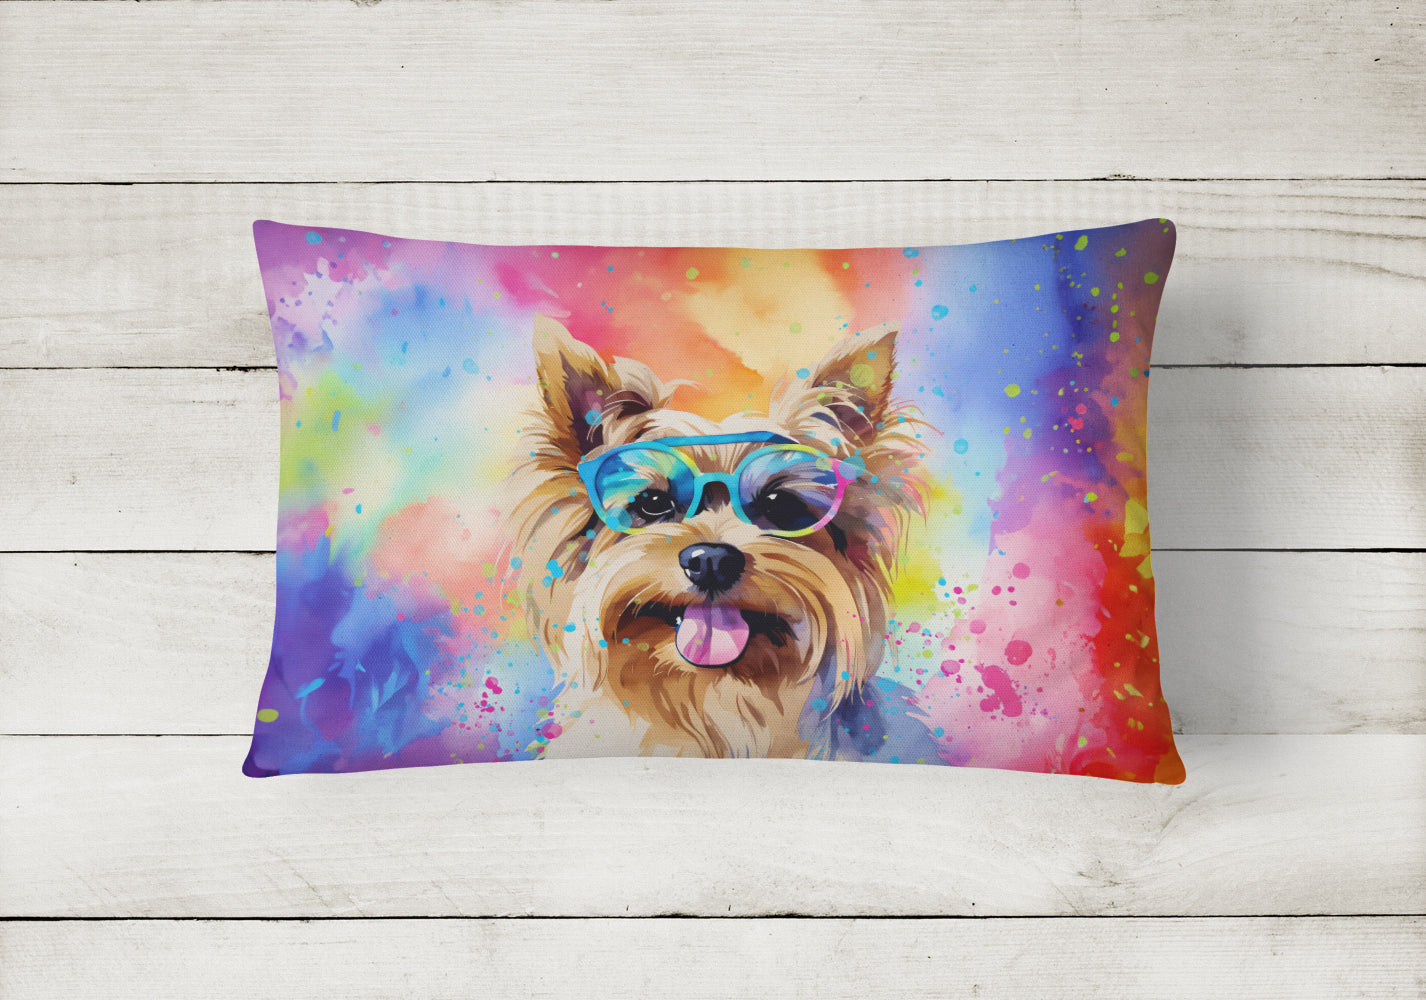 Buy this Yorkshire Terrier Hippie Dawg Fabric Decorative Pillow